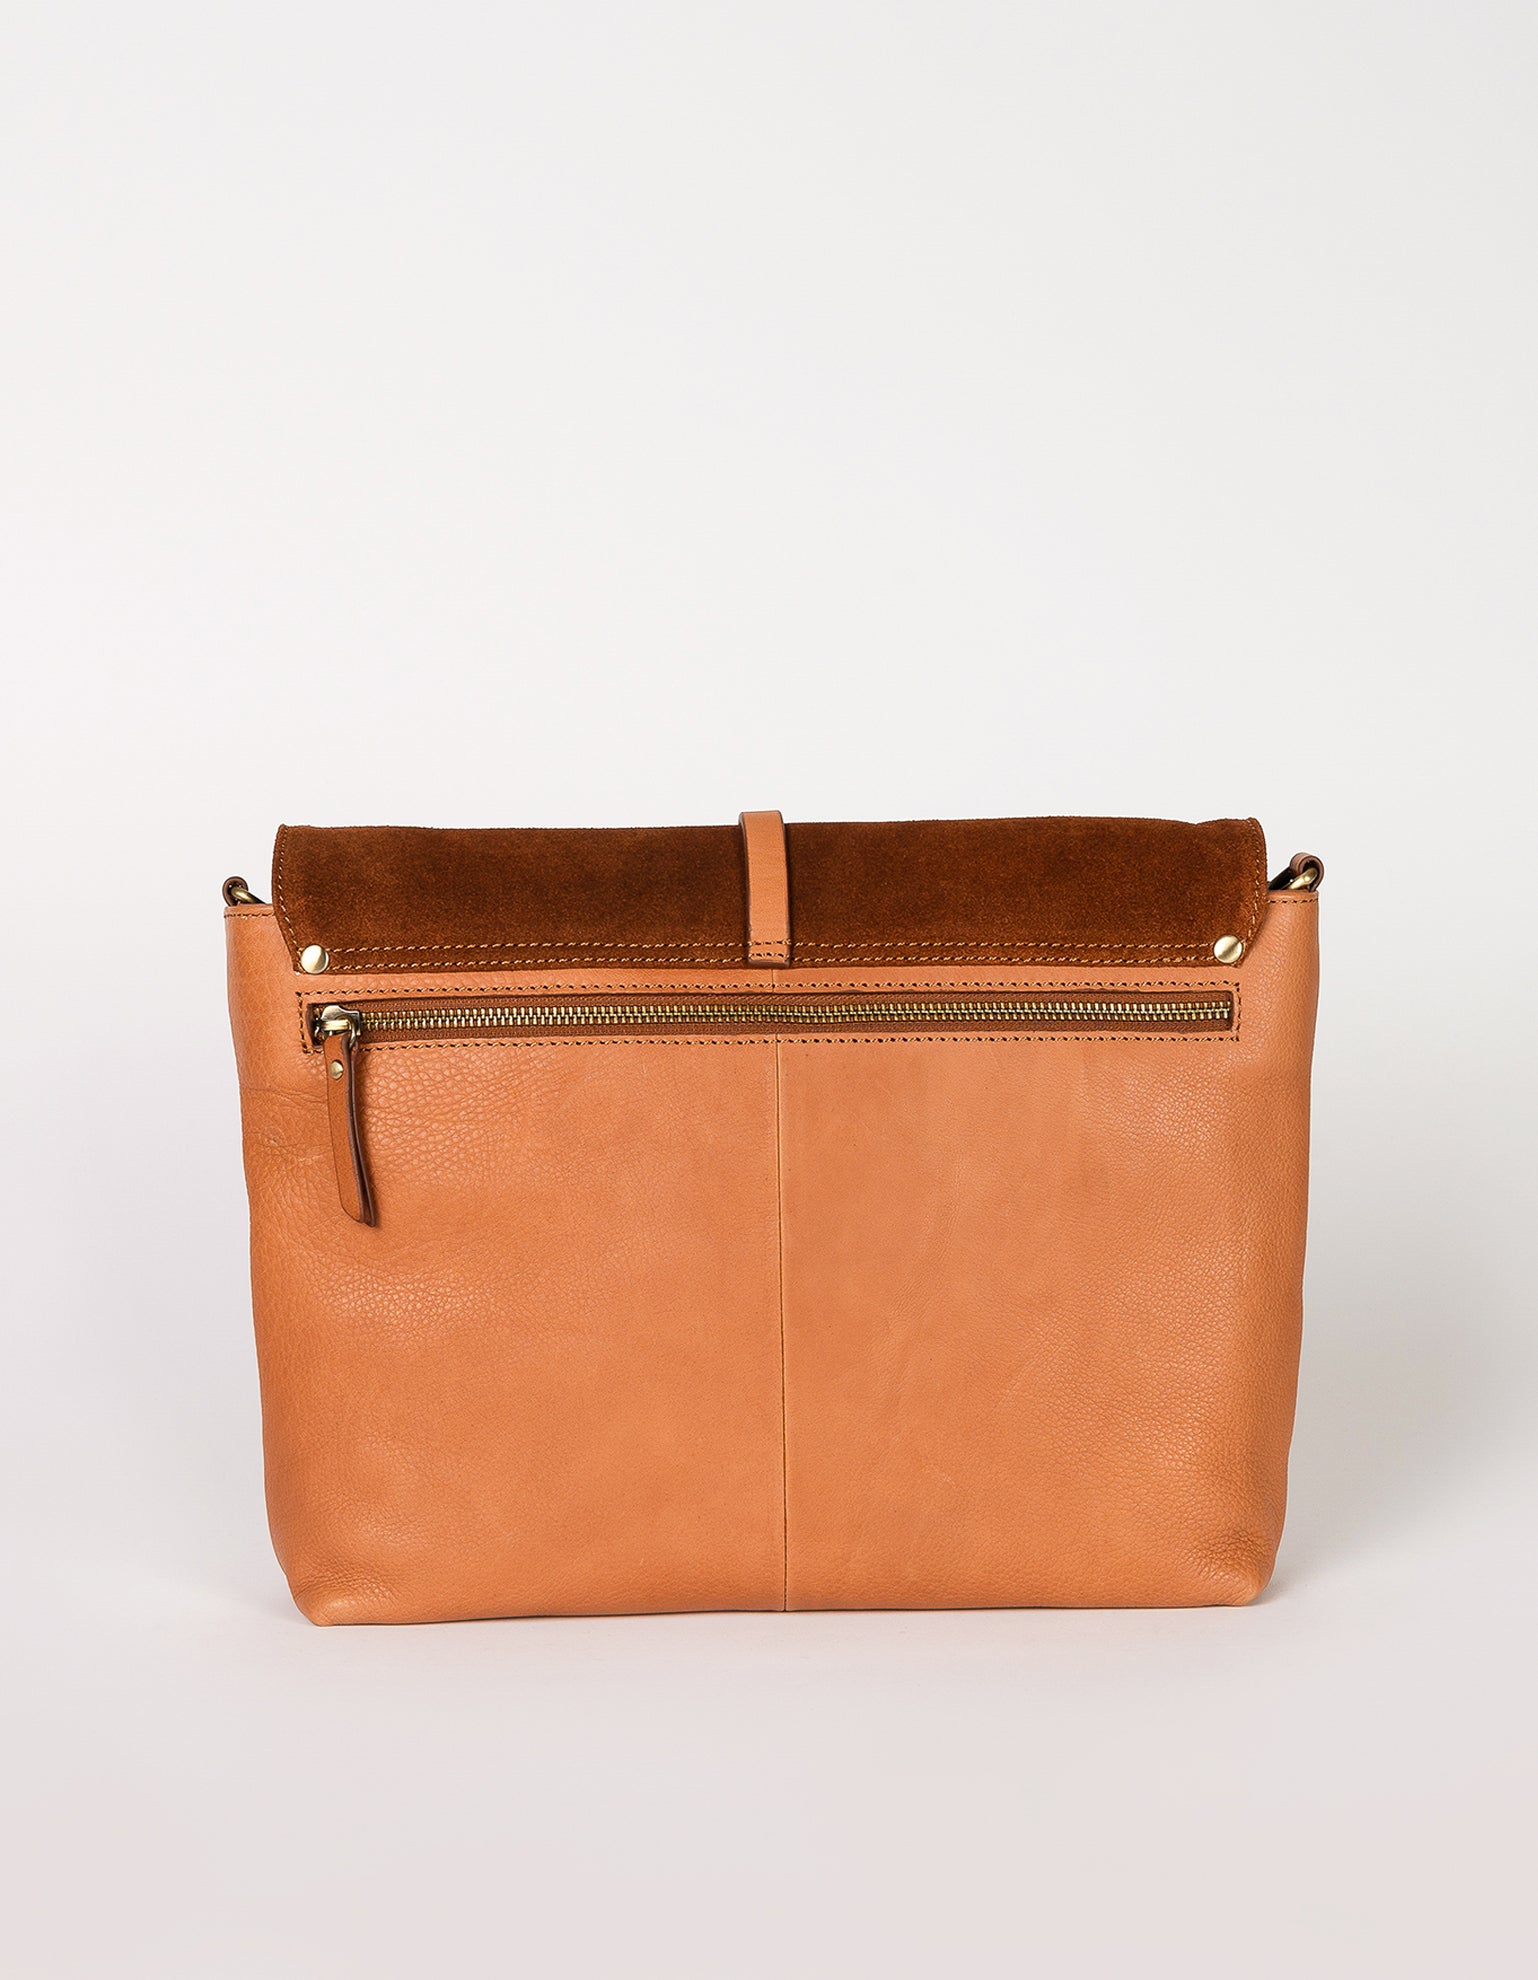 Wild Oak Soft Grain & Suede leather womens handbag. Square shape with an adjustable strap. Back product image.